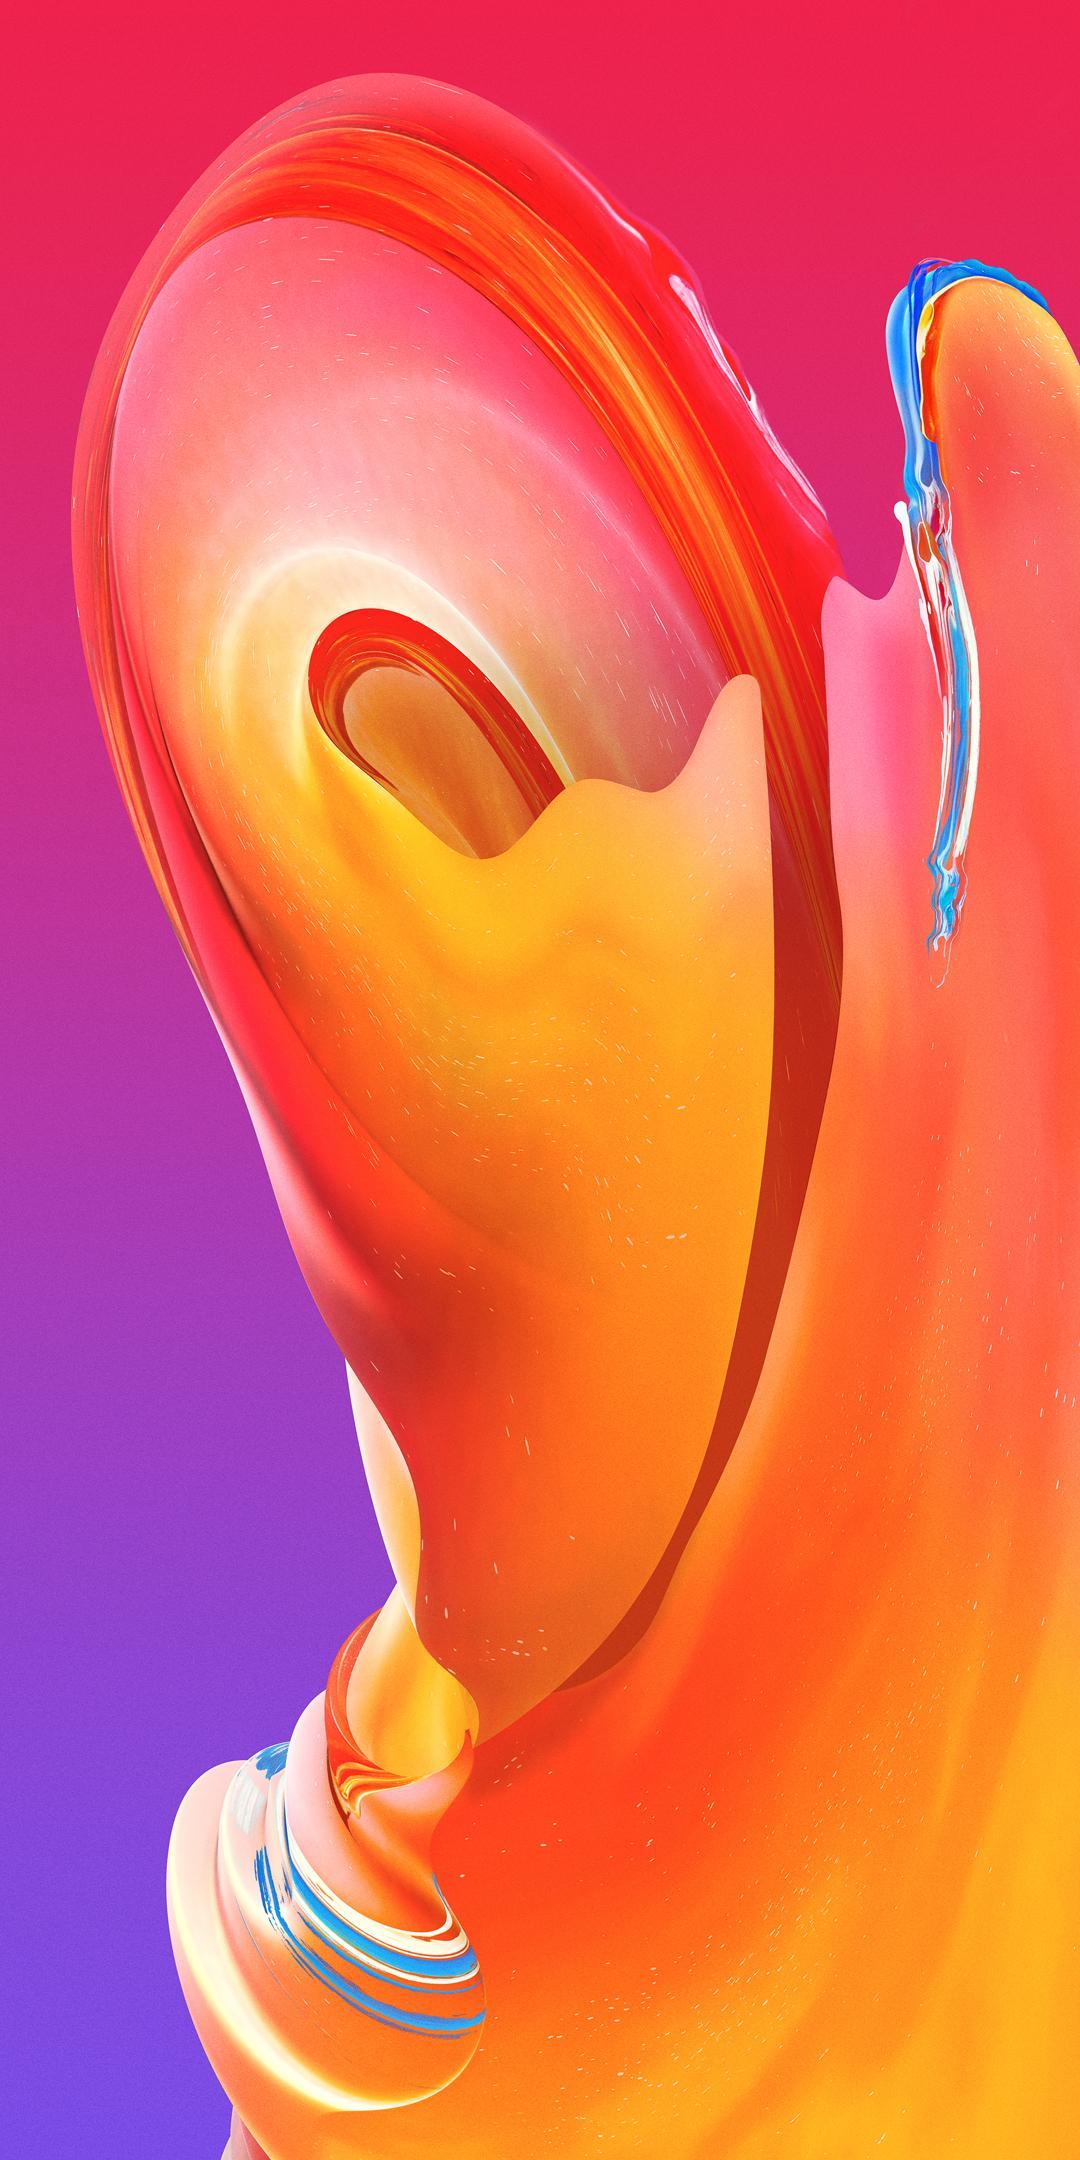 That Have The Official Wallpaper Of The Oneplus 5t